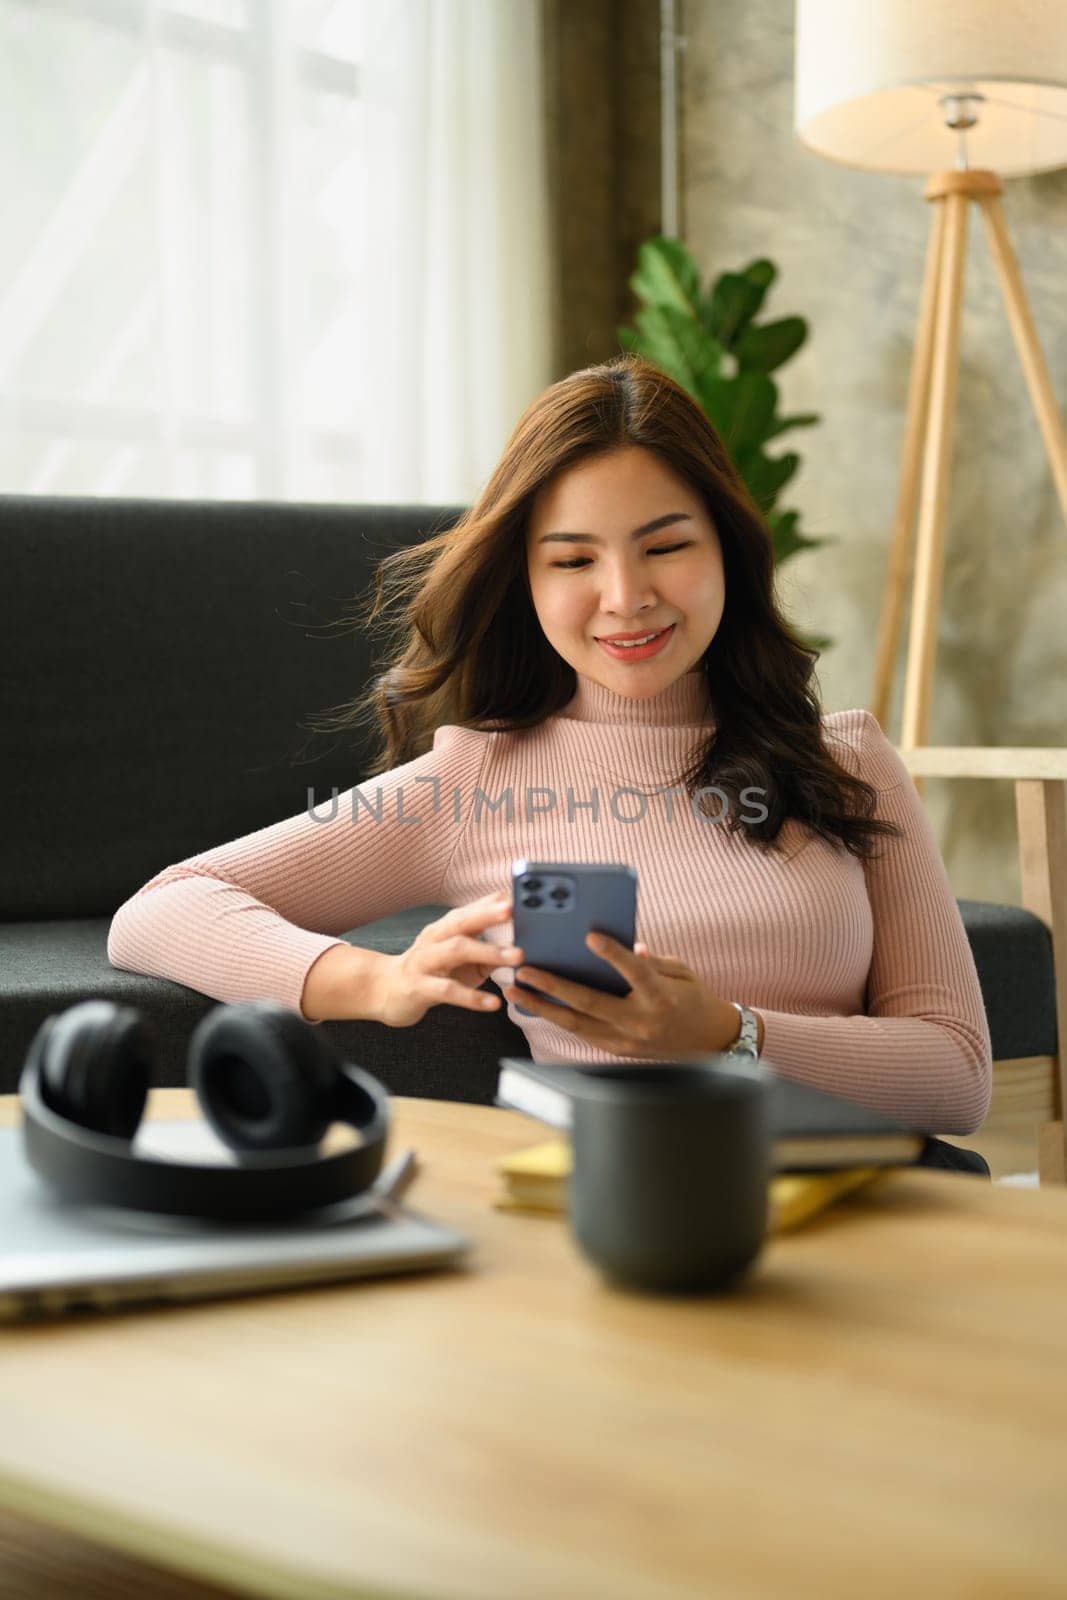 Beautiful young woman using smartphone, texting messaging, communication in social media.